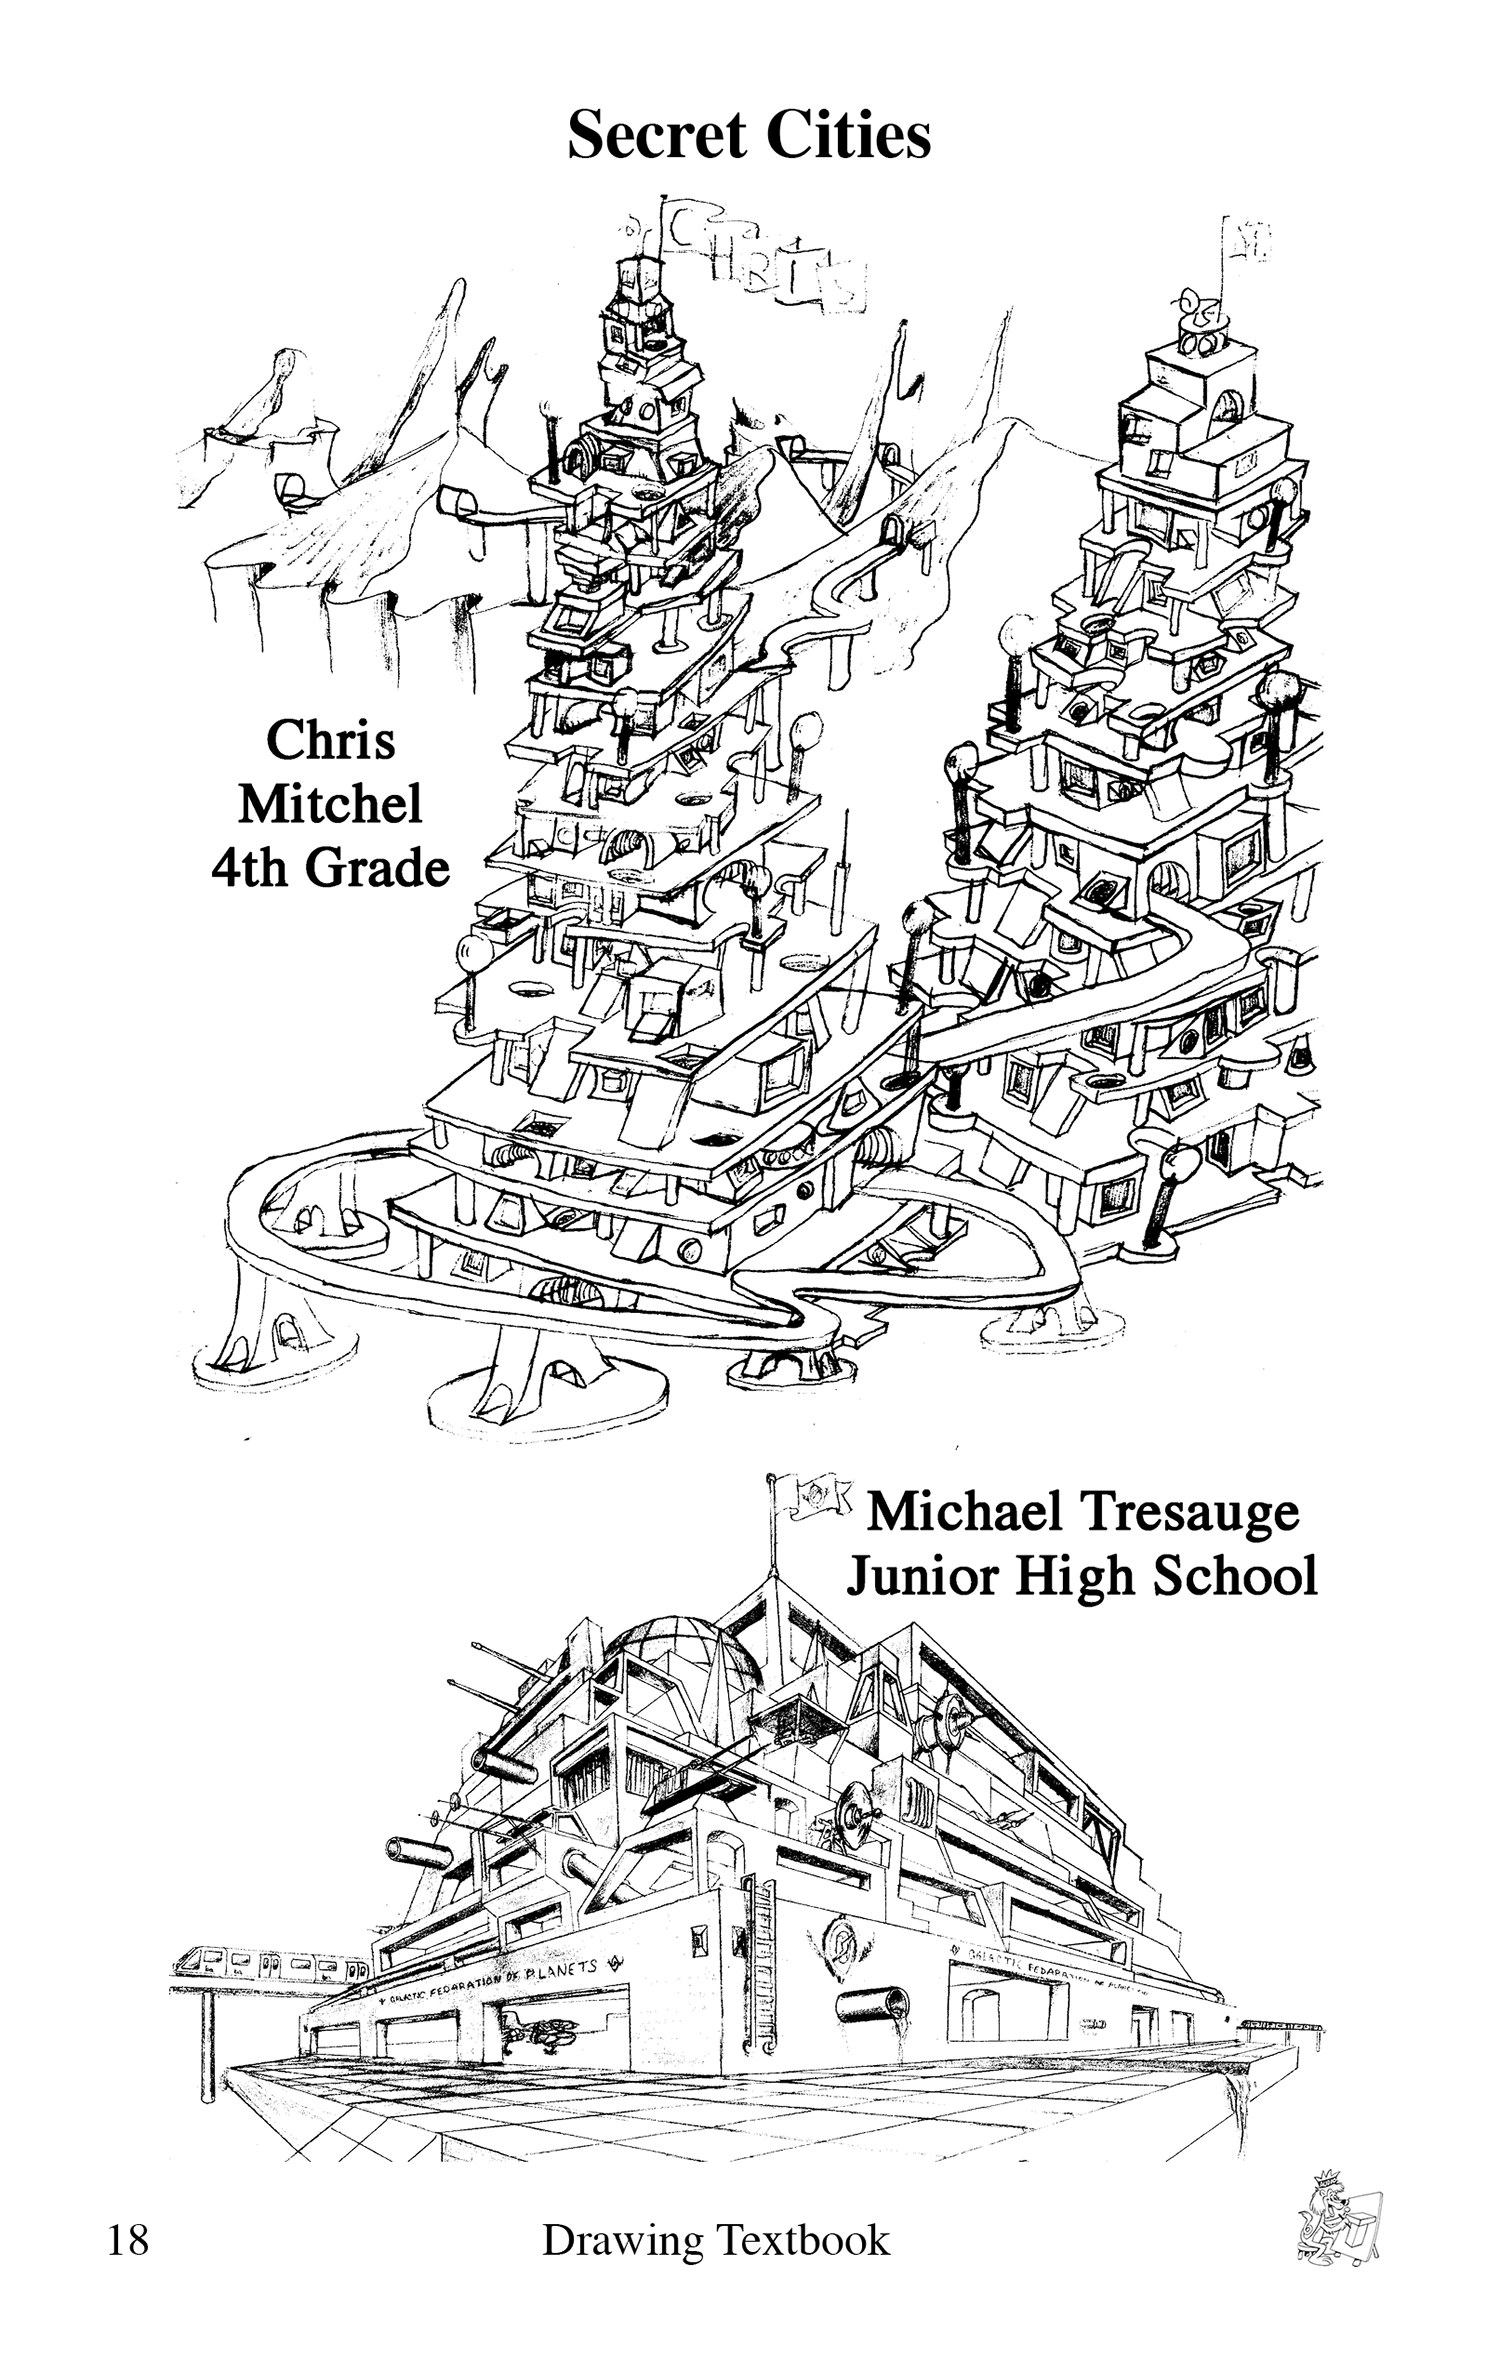 Secret Cities page from Drawing Textbook by Bruce McIntyre